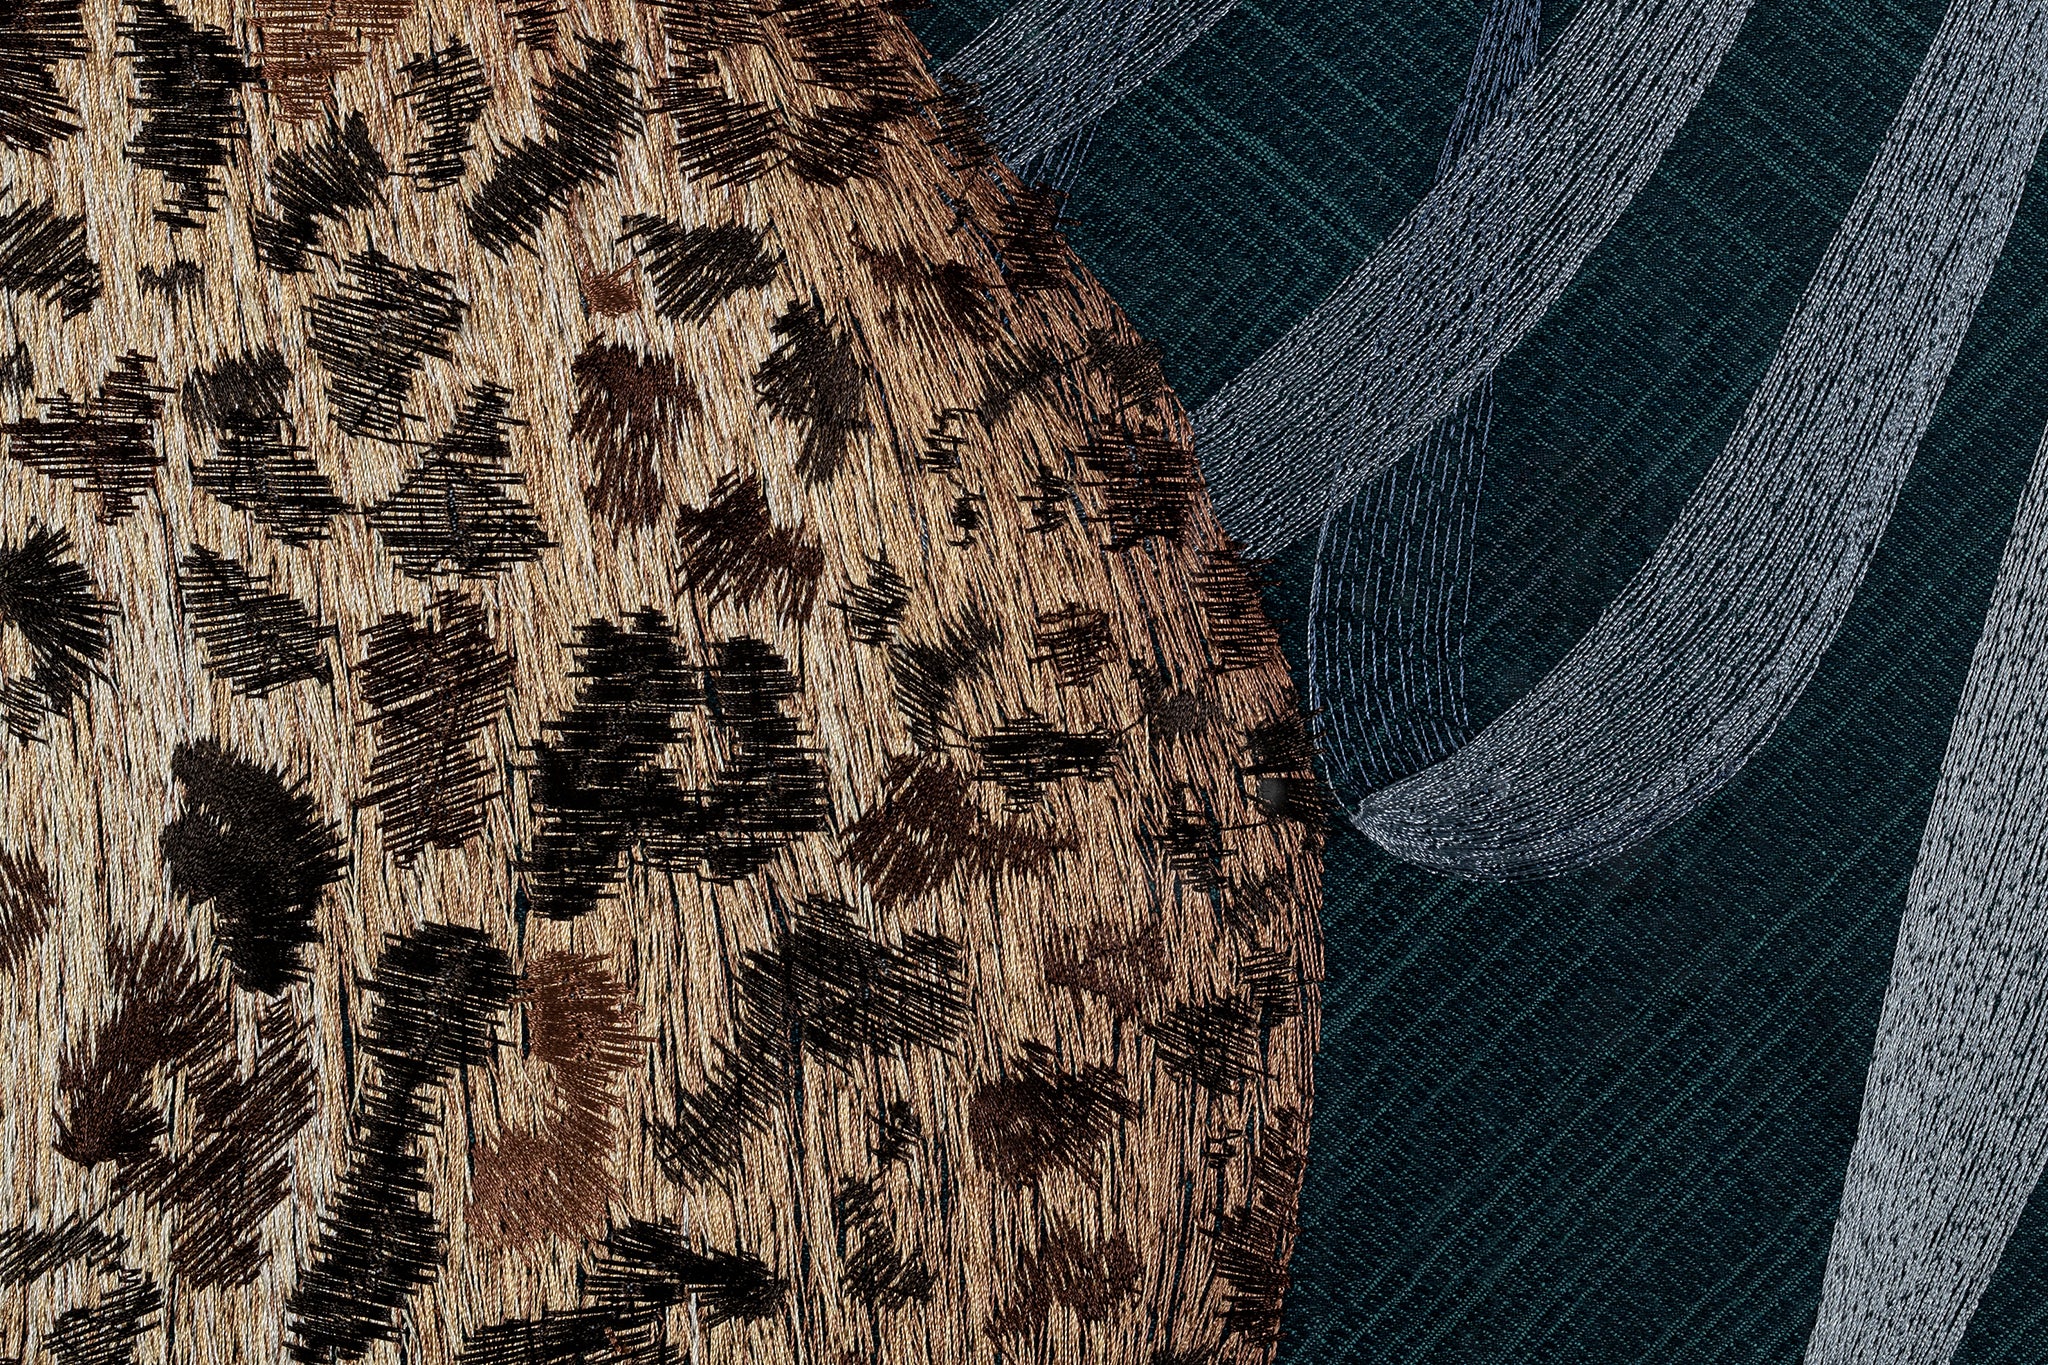 The fur and plant details of the leopard design in embroidery fine wall art.